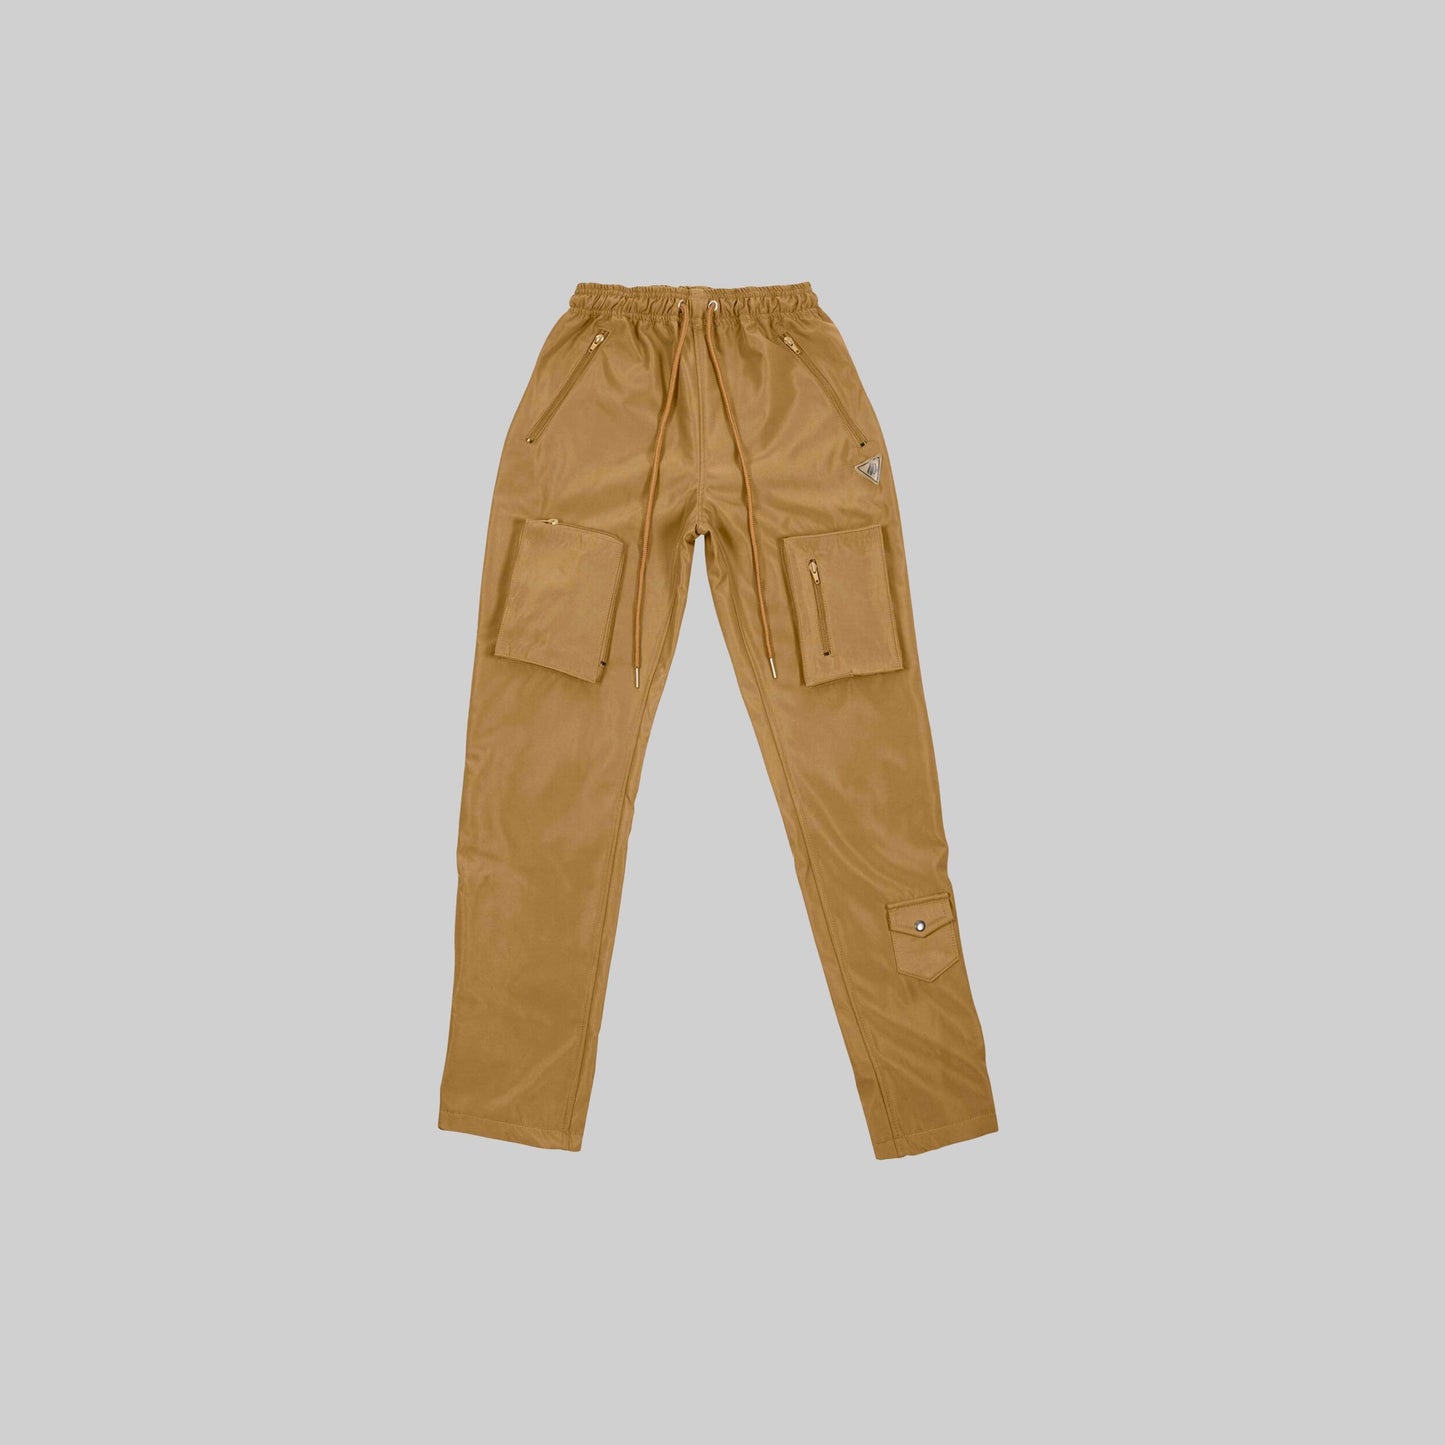 GOLD TIER SPACE V2 CARGO PANT